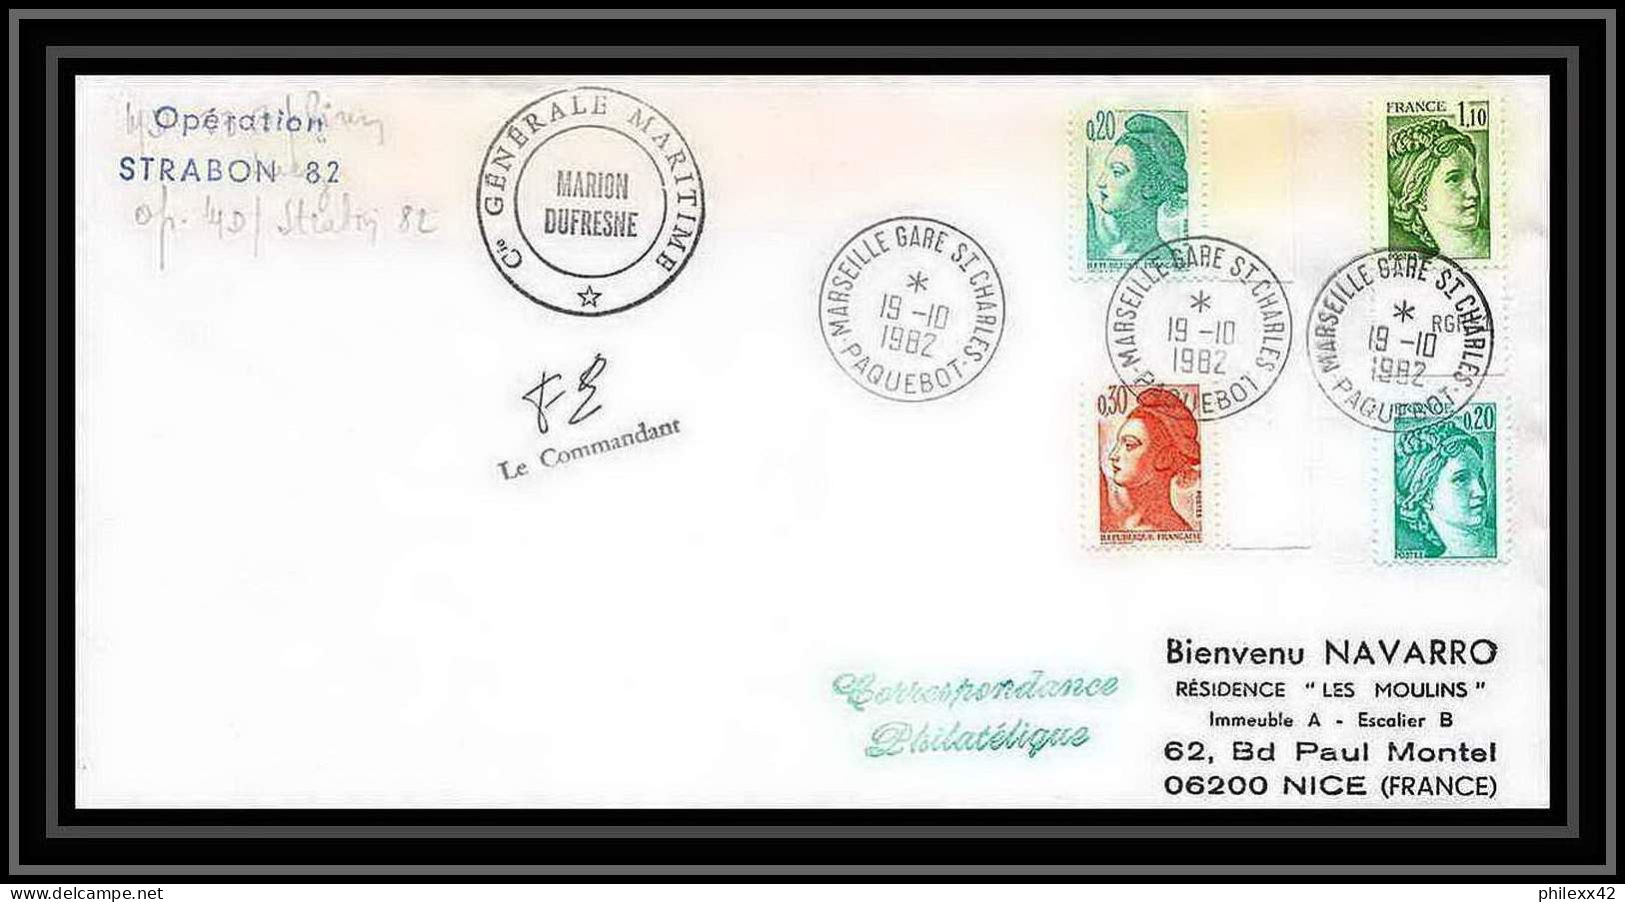 1215 Operation Strabon 82 Marion Dufresne 19/10/1982 TAAF Antarctic Terres Australes Lettre (cover) Signé Signed - Covers & Documents